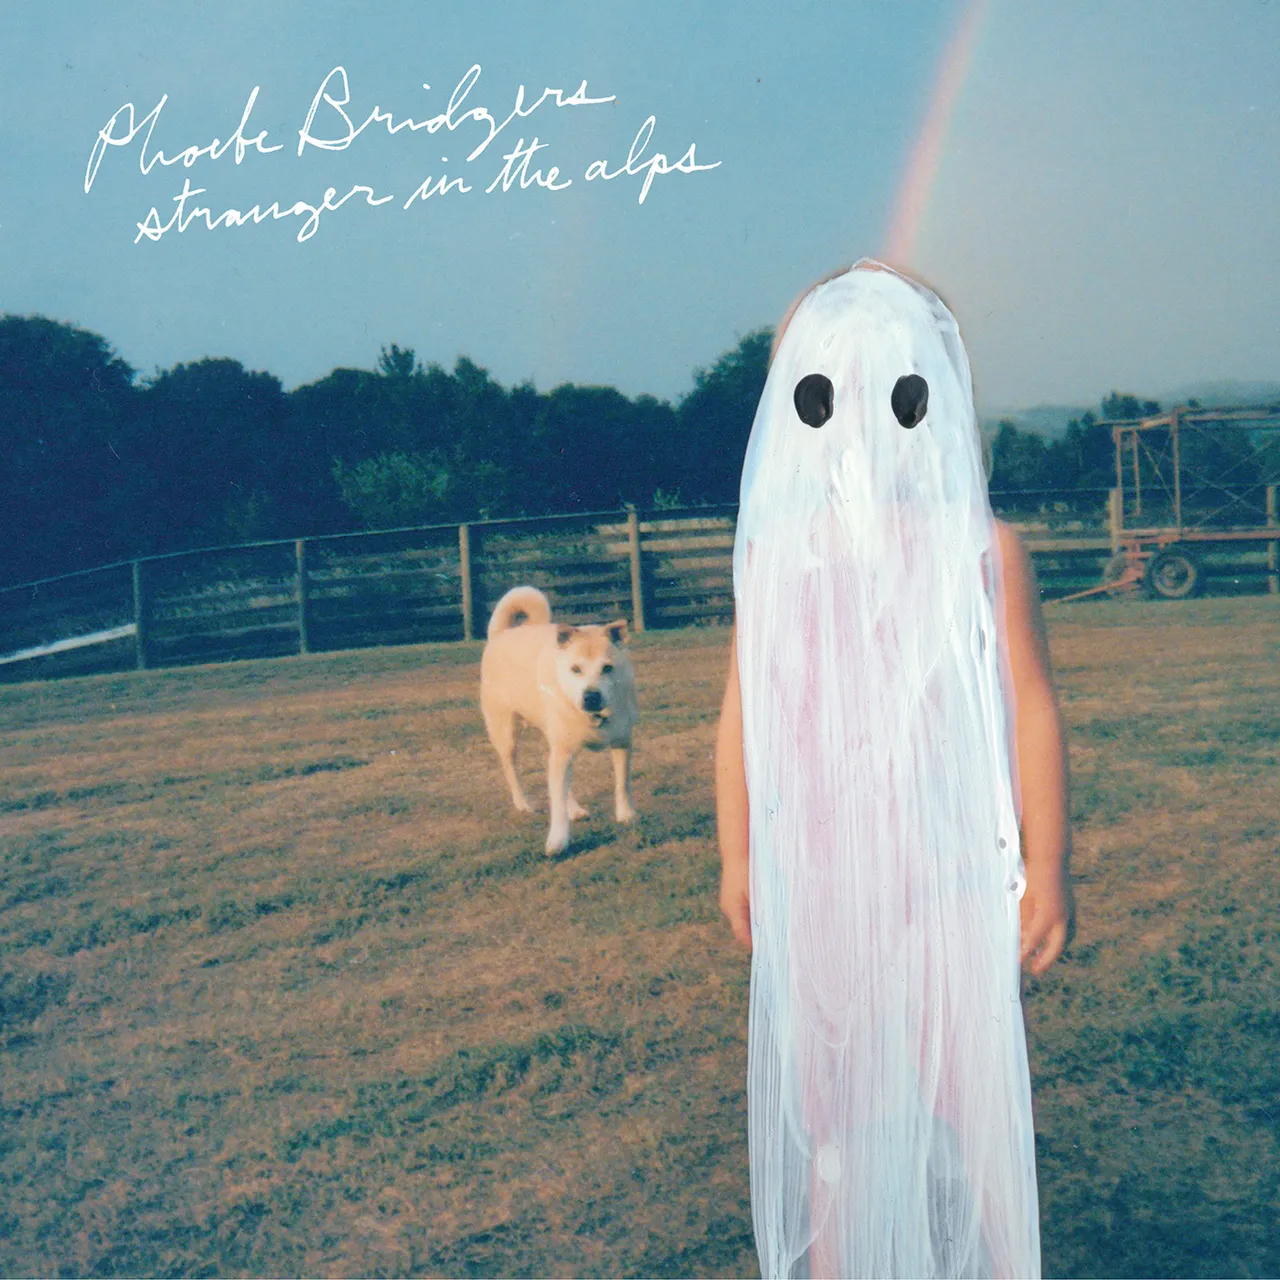 In Rotation: Stranger In The Alps by Phoebe Bridgers